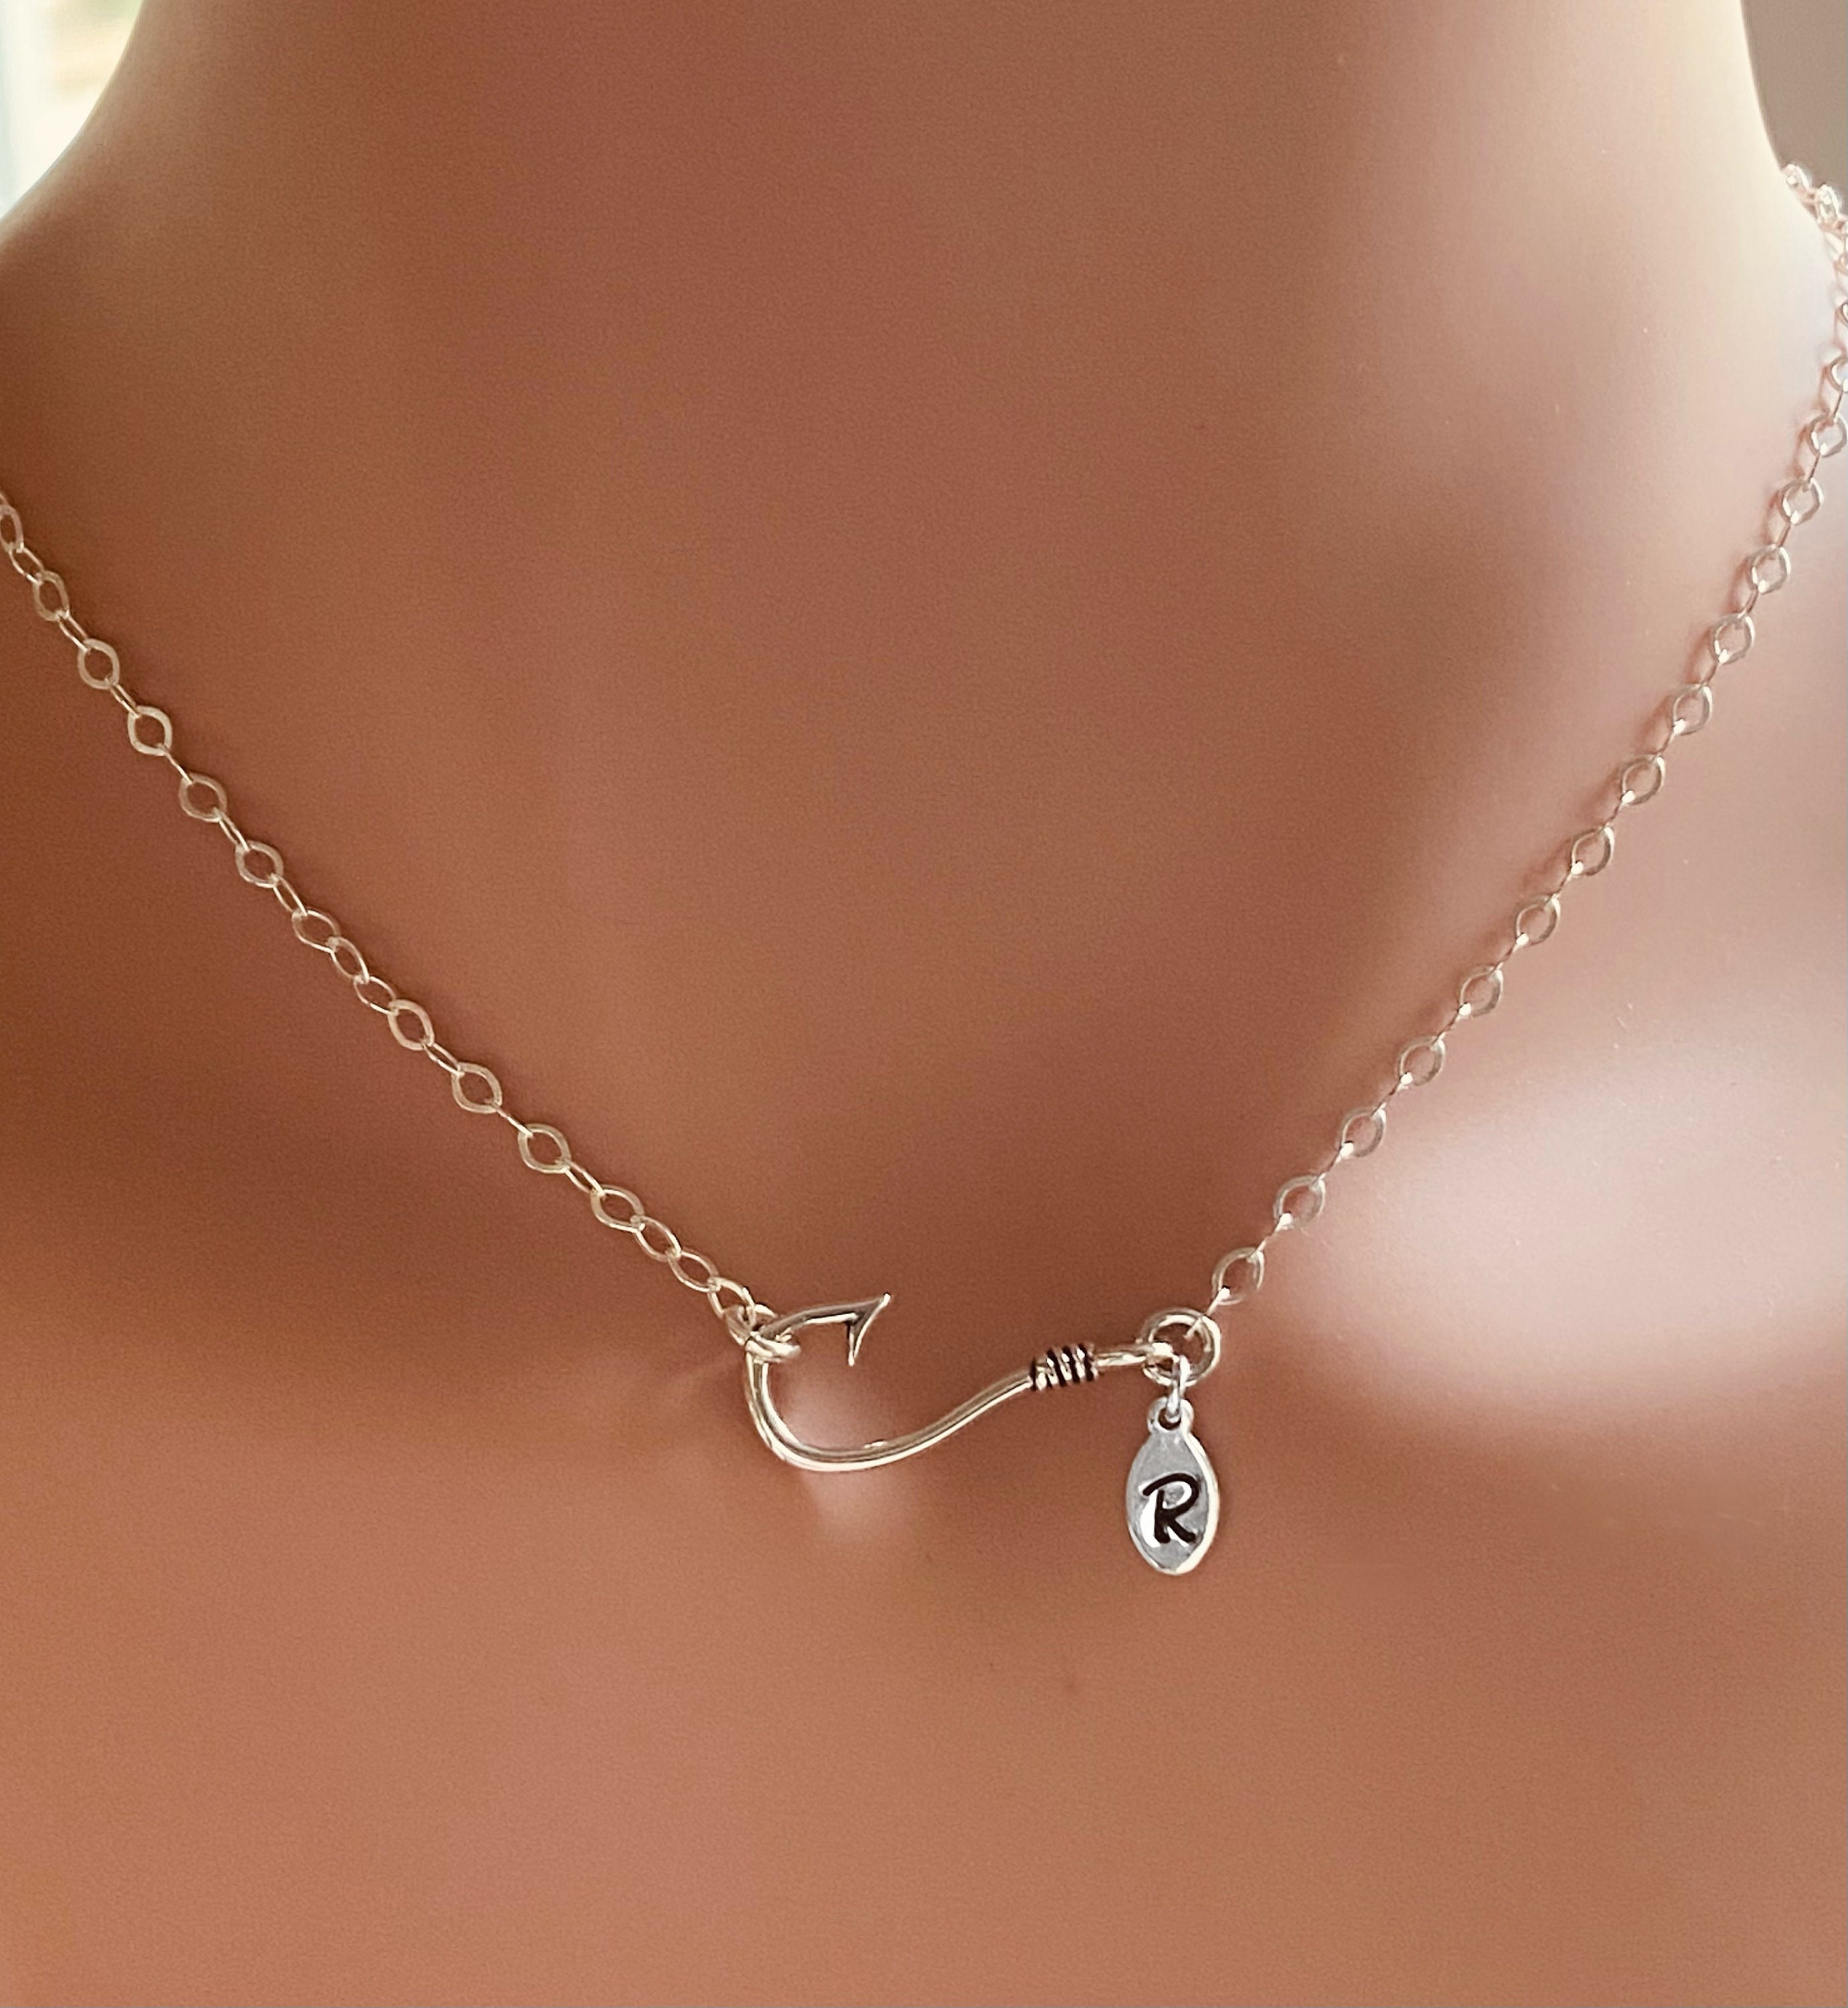 Madeinsea - Pirate Fish Hook Necklace Silver